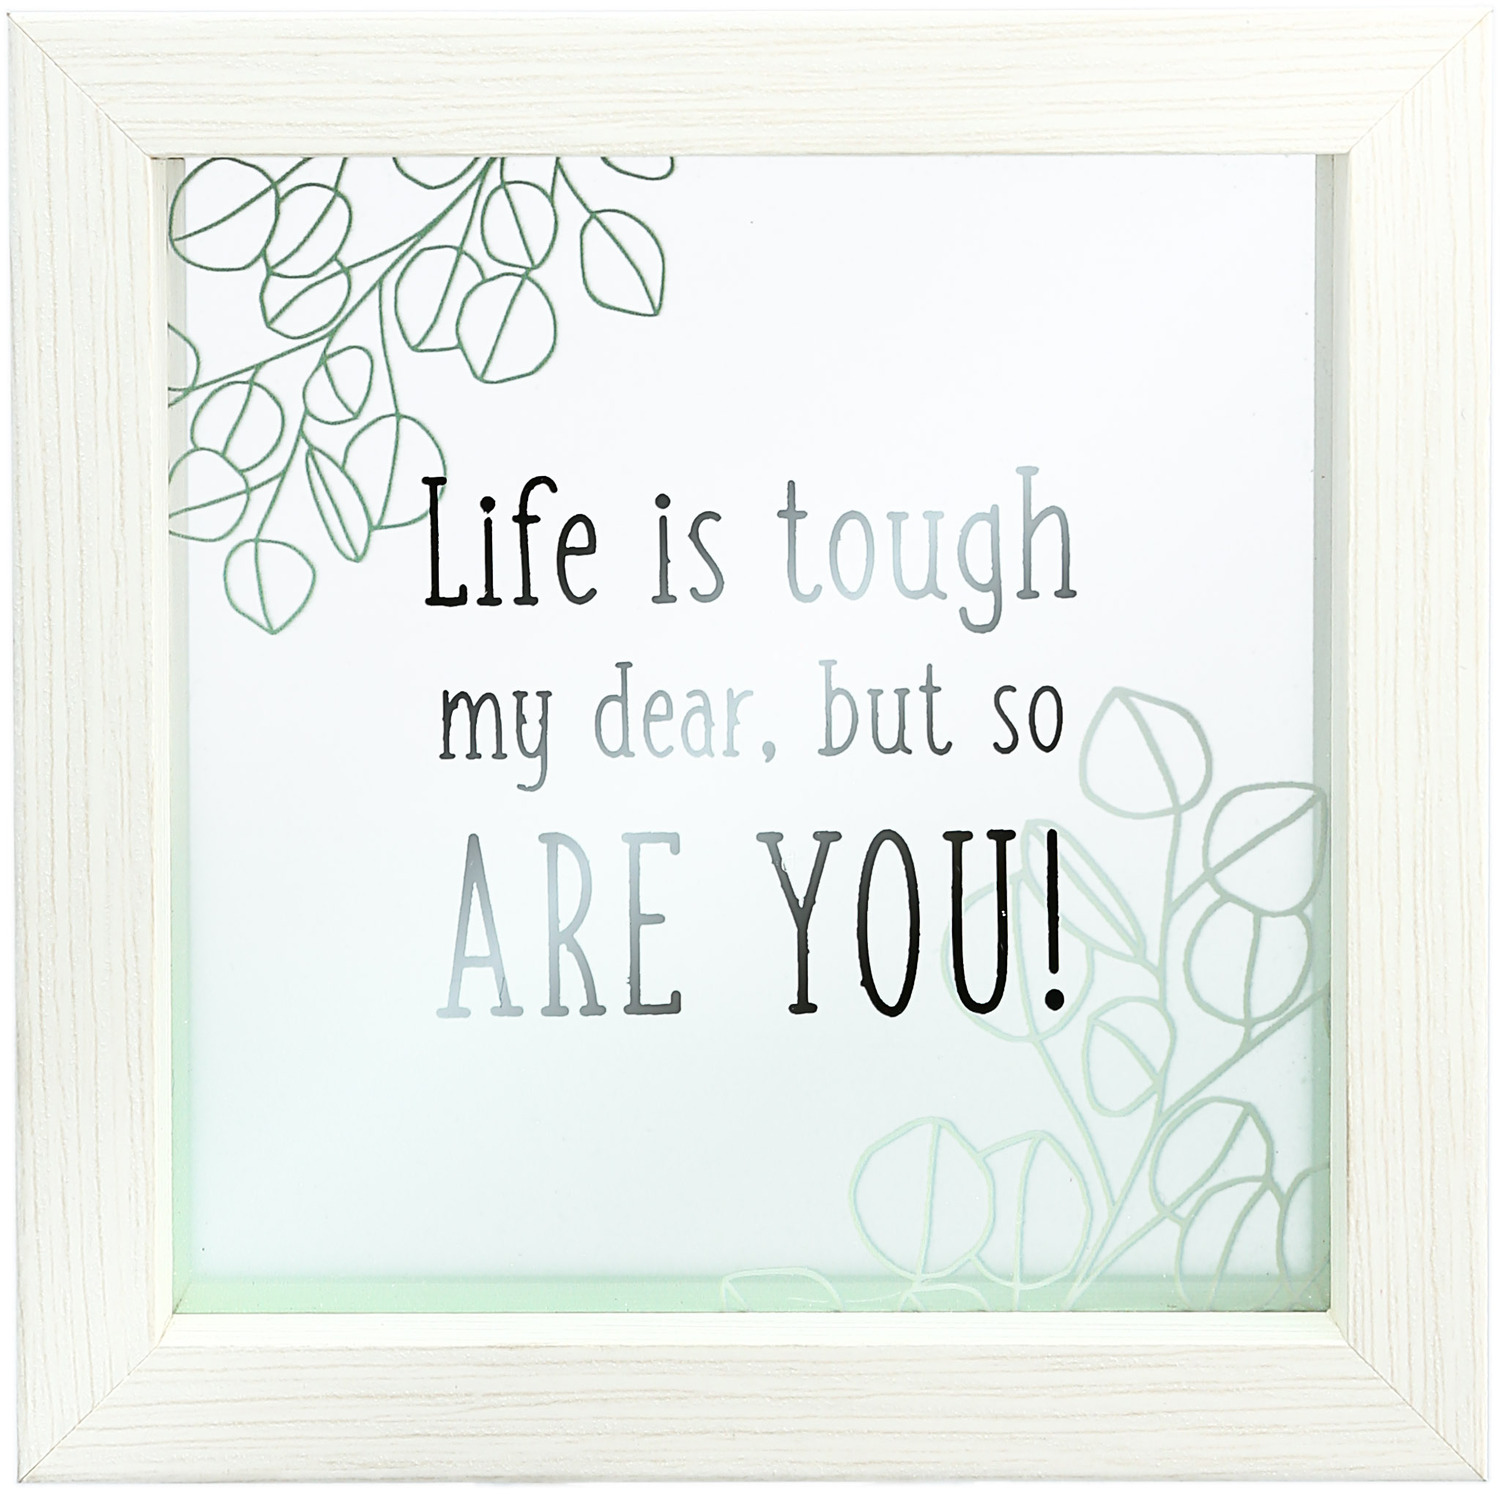 Life is Tough by Faith Hope and Healing - Life is Tough - 5" x 5" Framed Glass Plaque